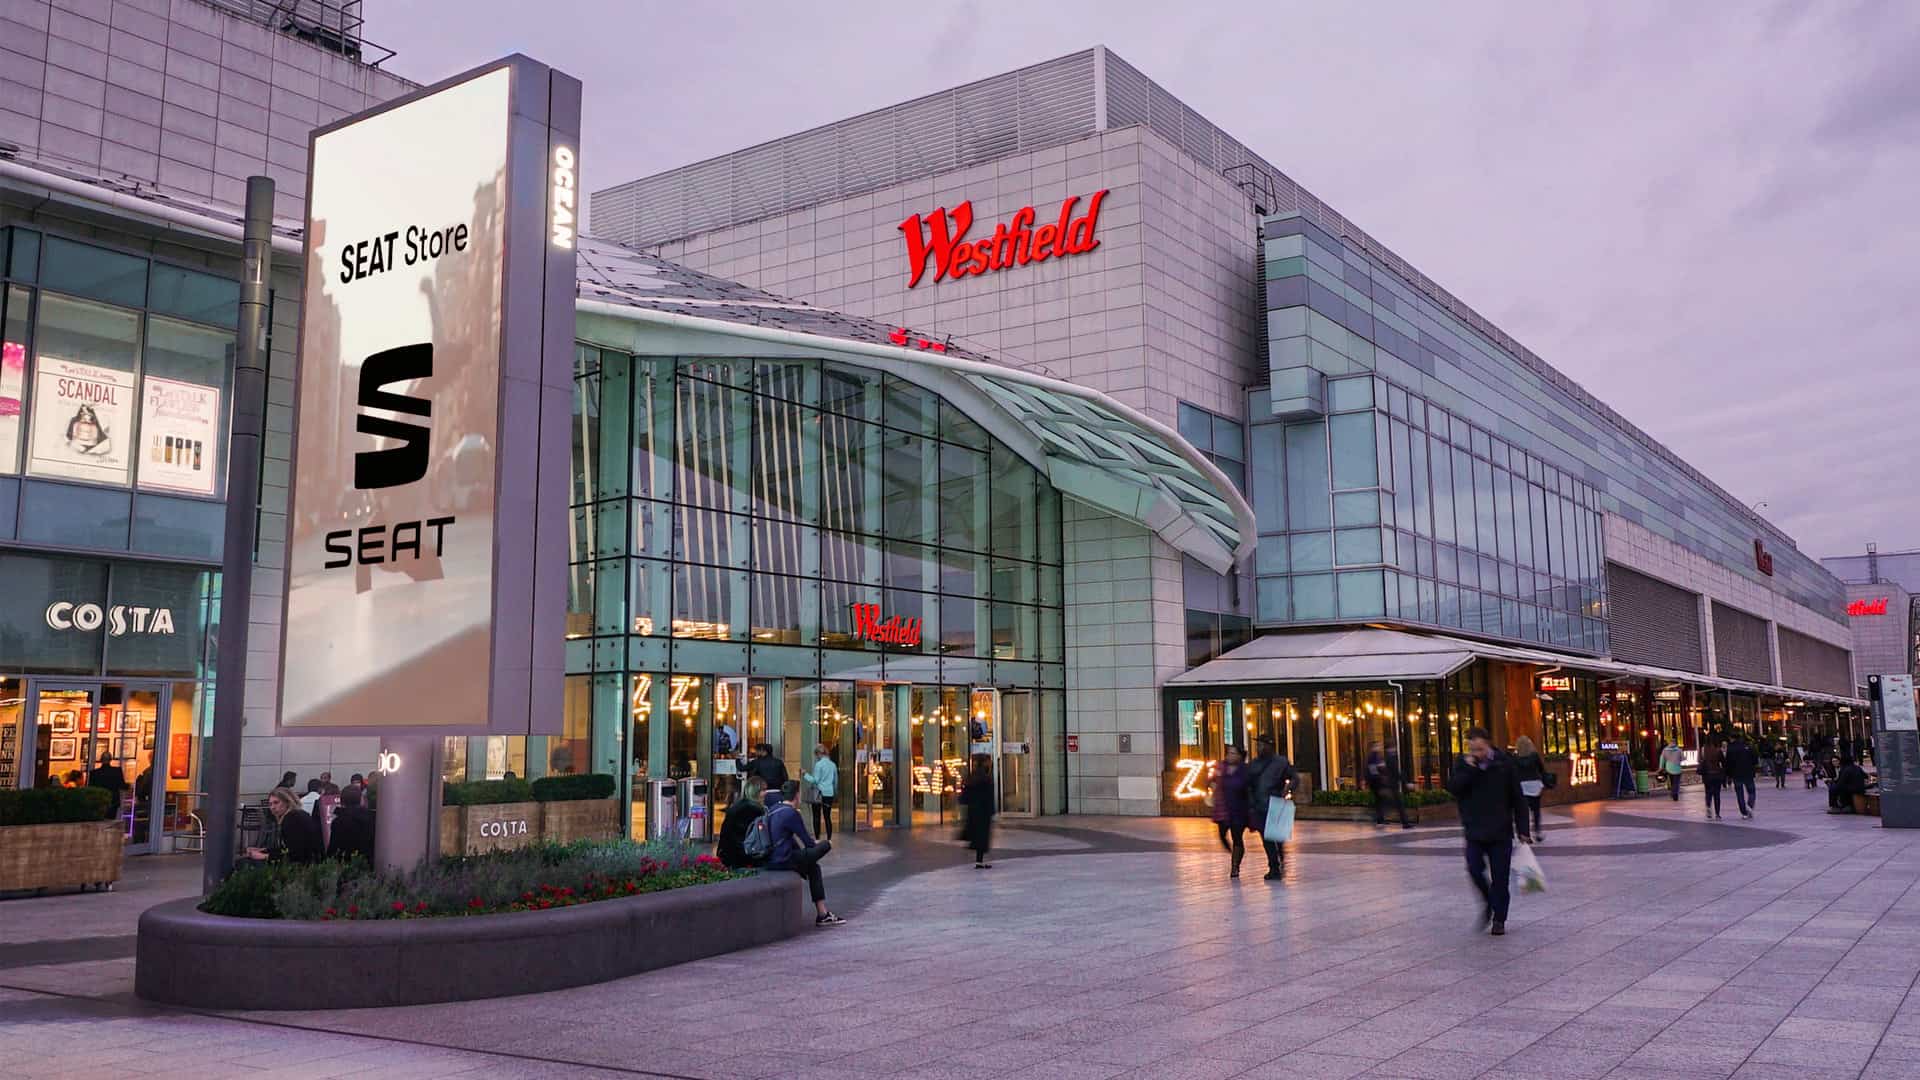 Westfield Stratford city shopping centre